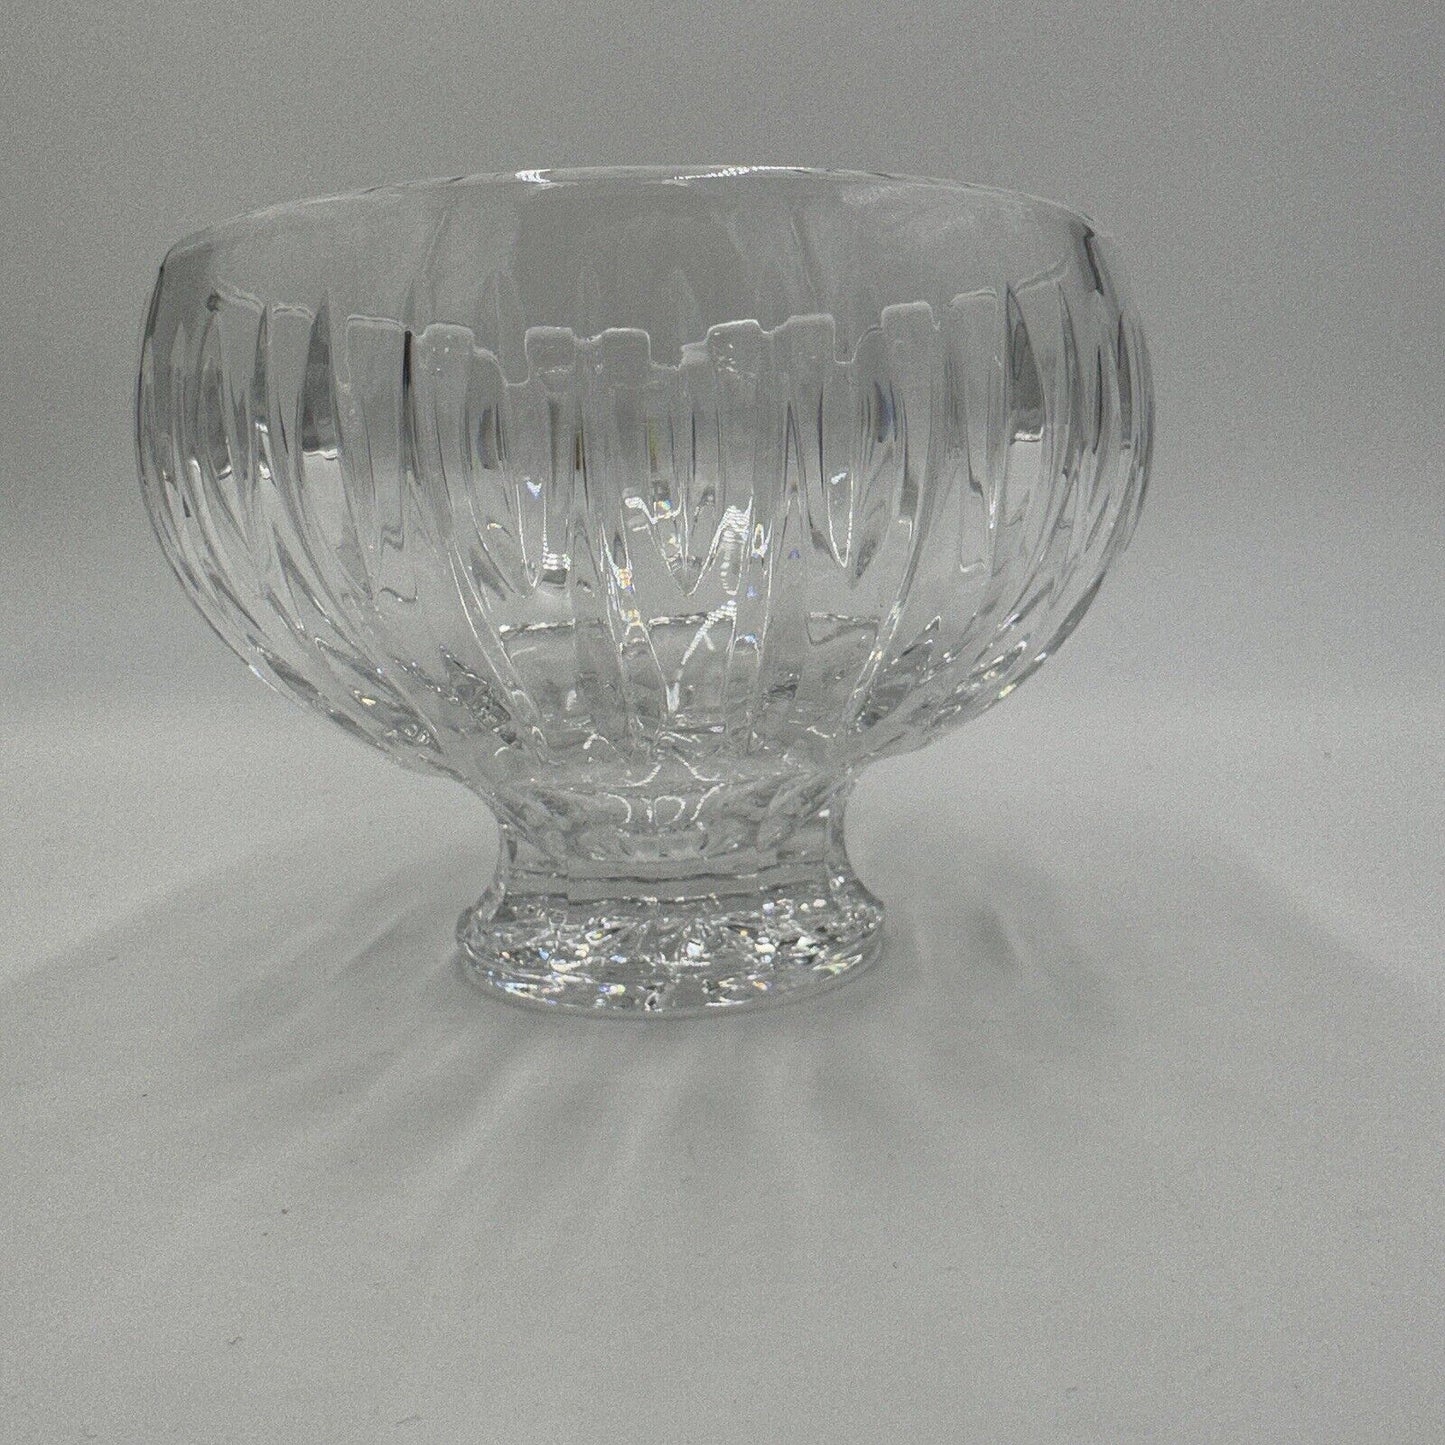 Marquis by Waterford Crystal Sheridan Footed Bowl Vintage 5 inch Centerpiece